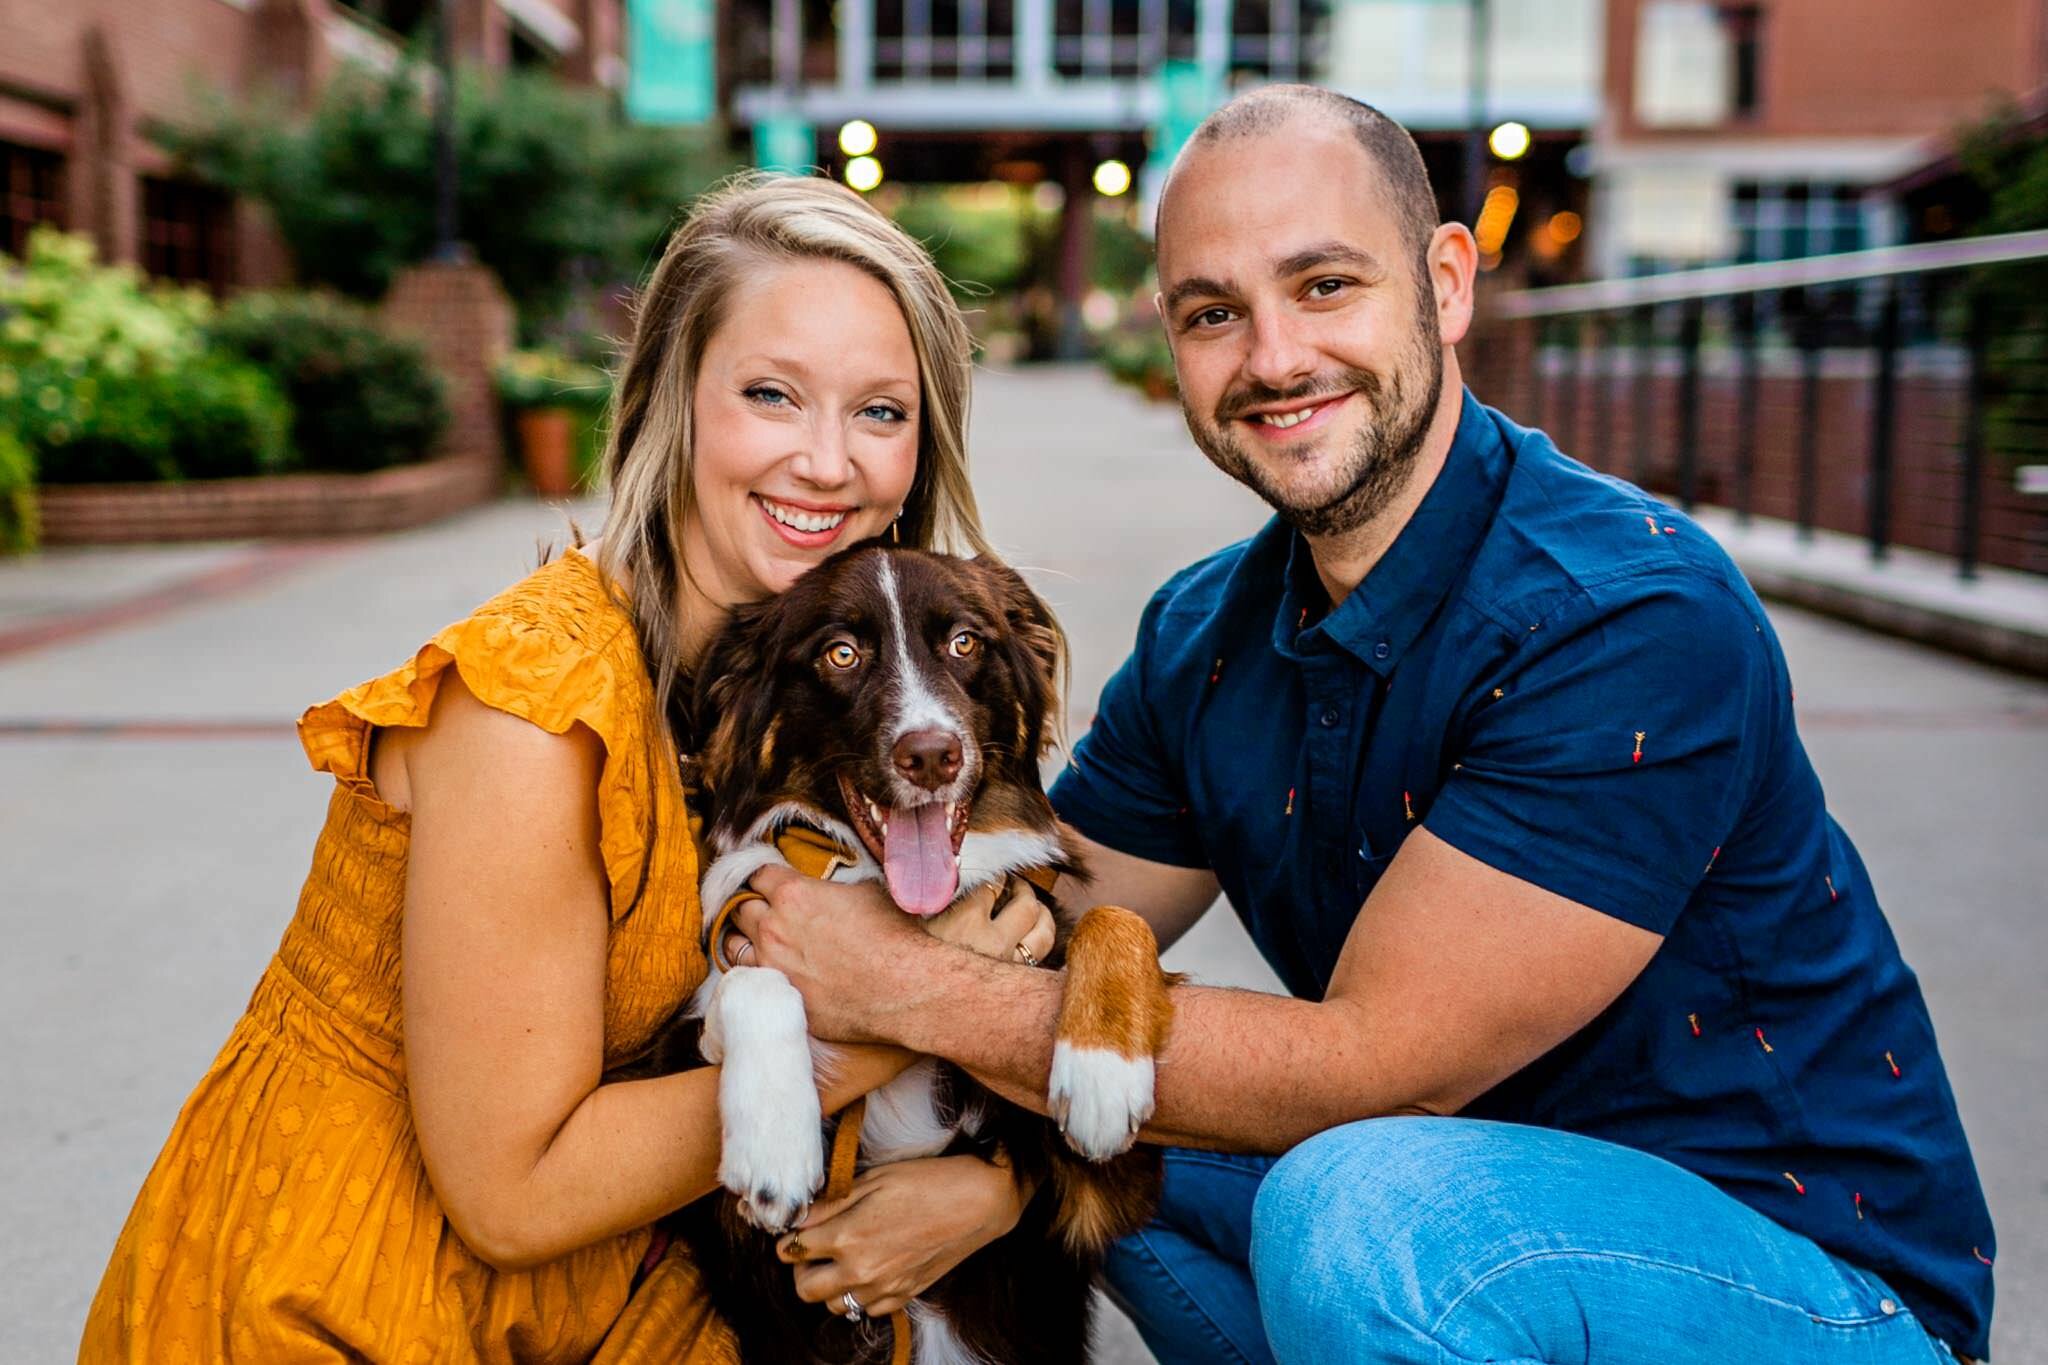 Durham Family Photographer | By G. Lin Photography | Beautiful candid photo of man and woman hugging dog and looking at camera